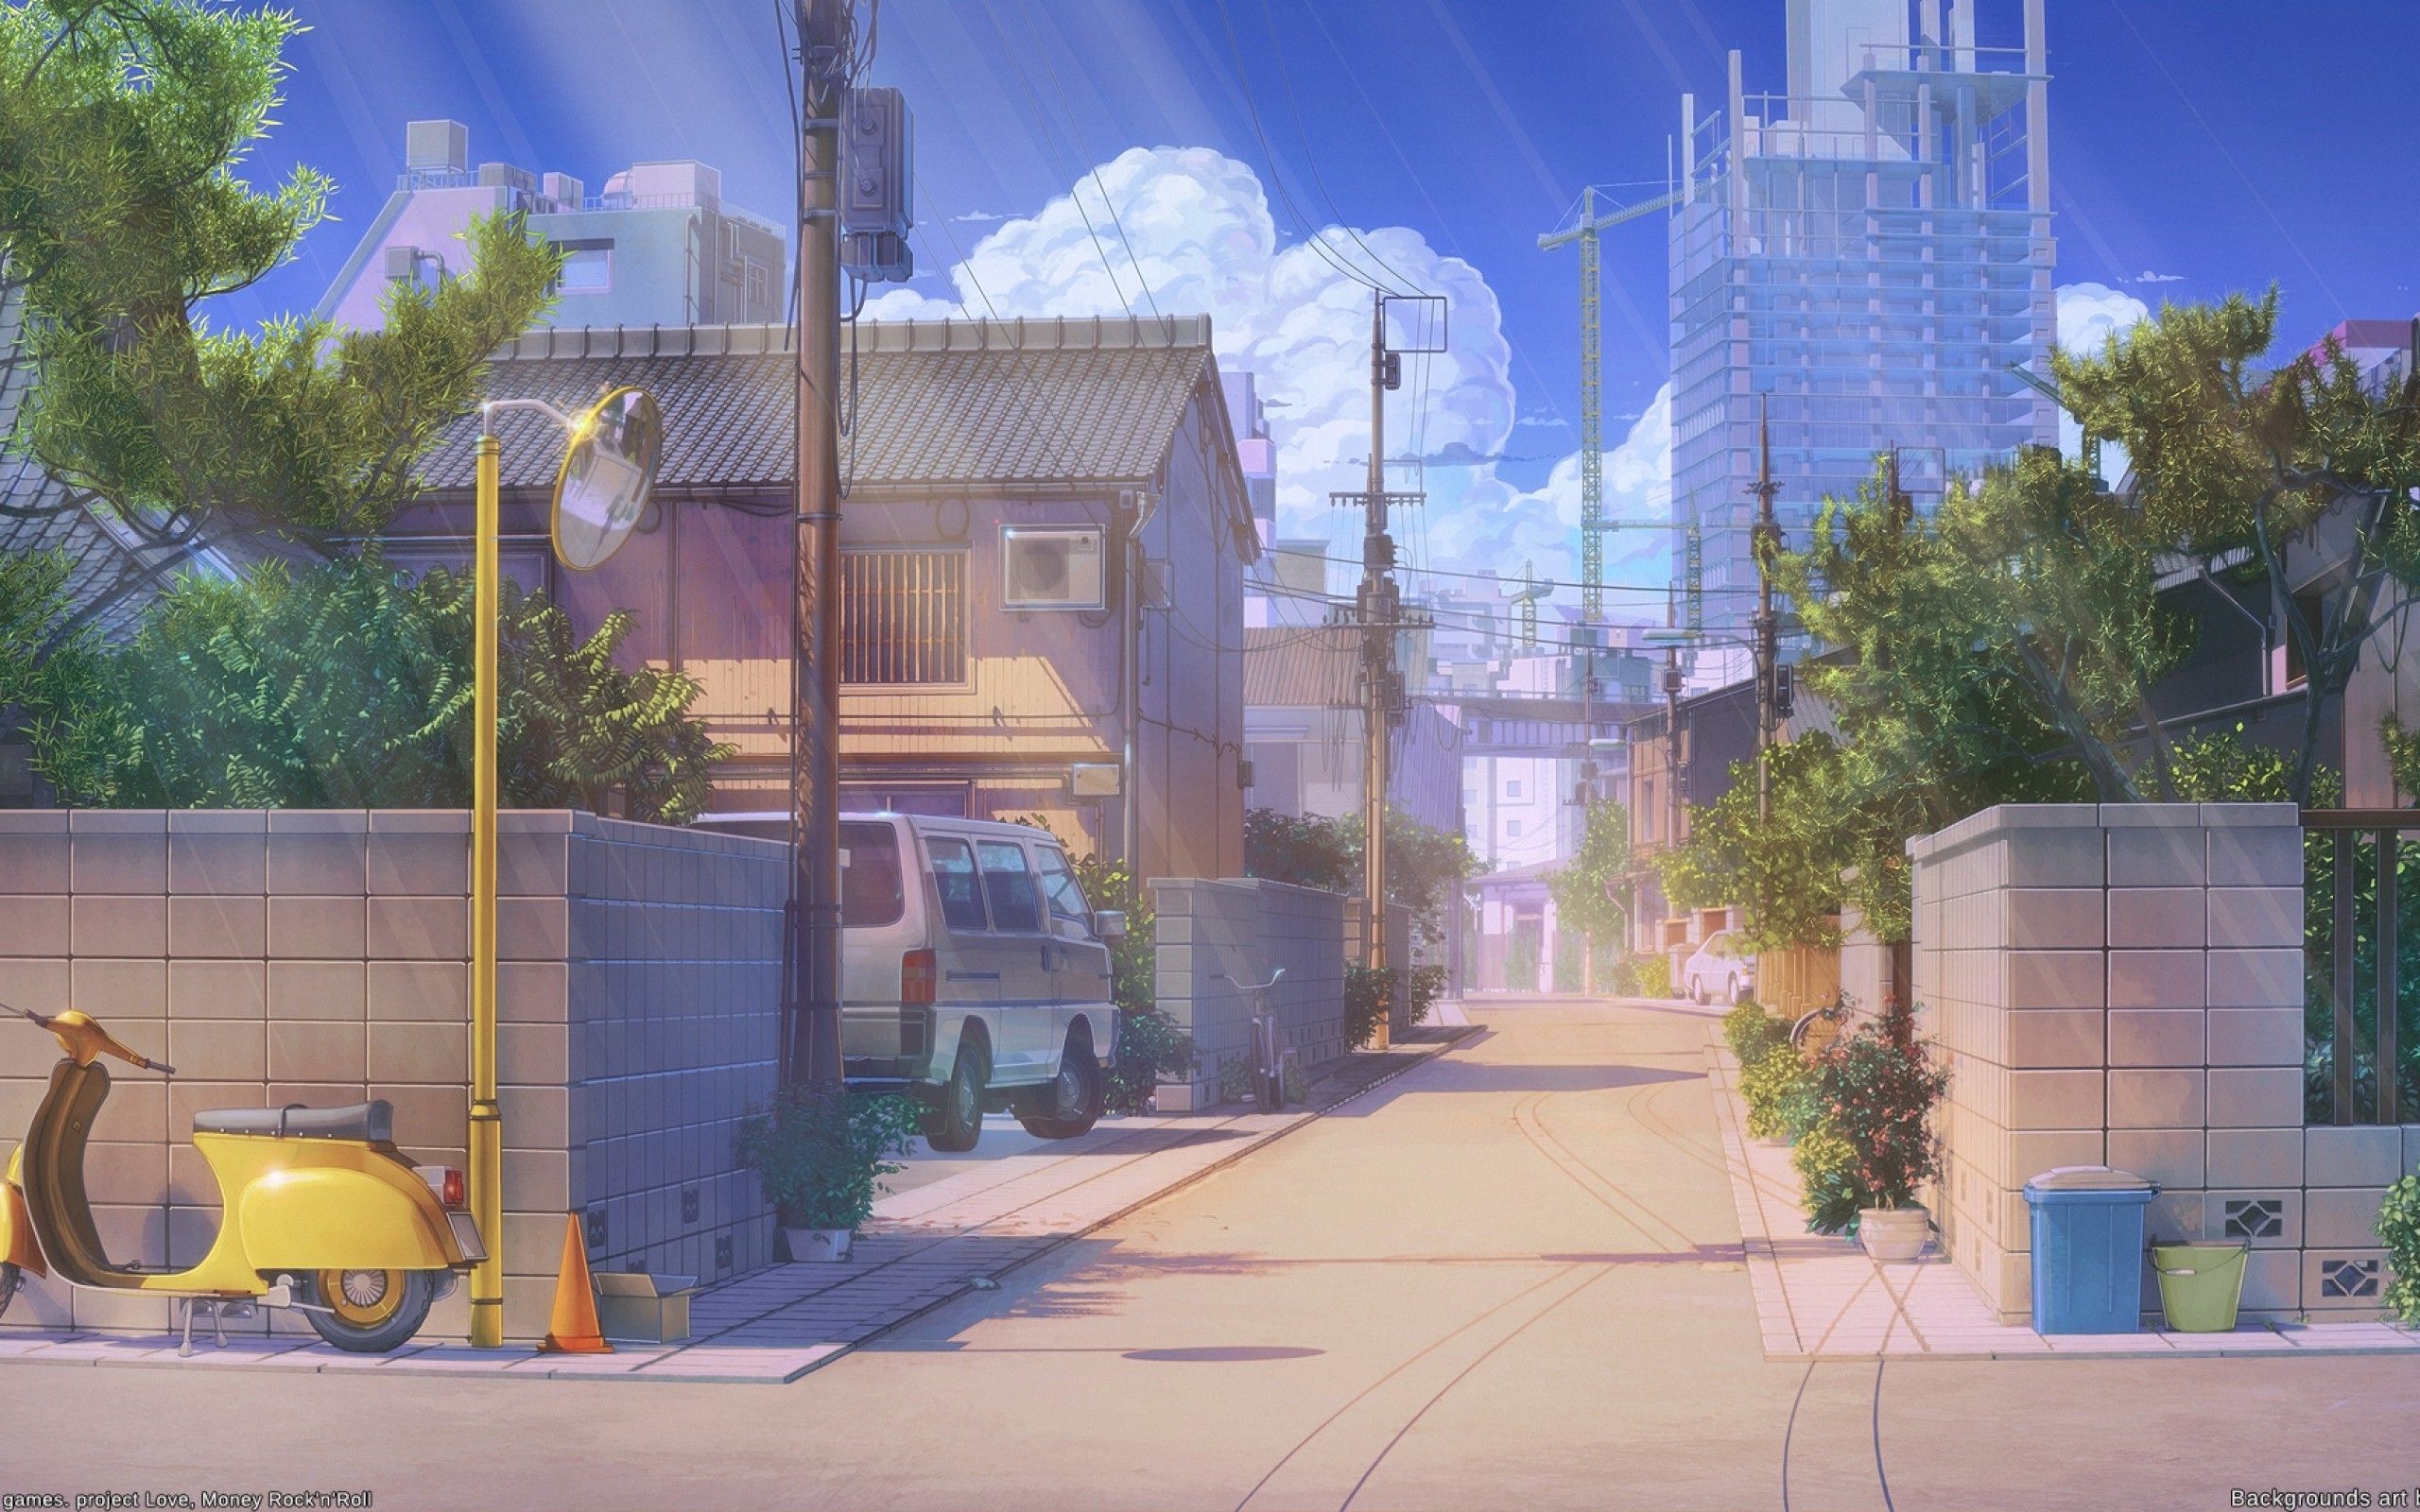 40+ Anime Street HD Wallpapers and Backgrounds